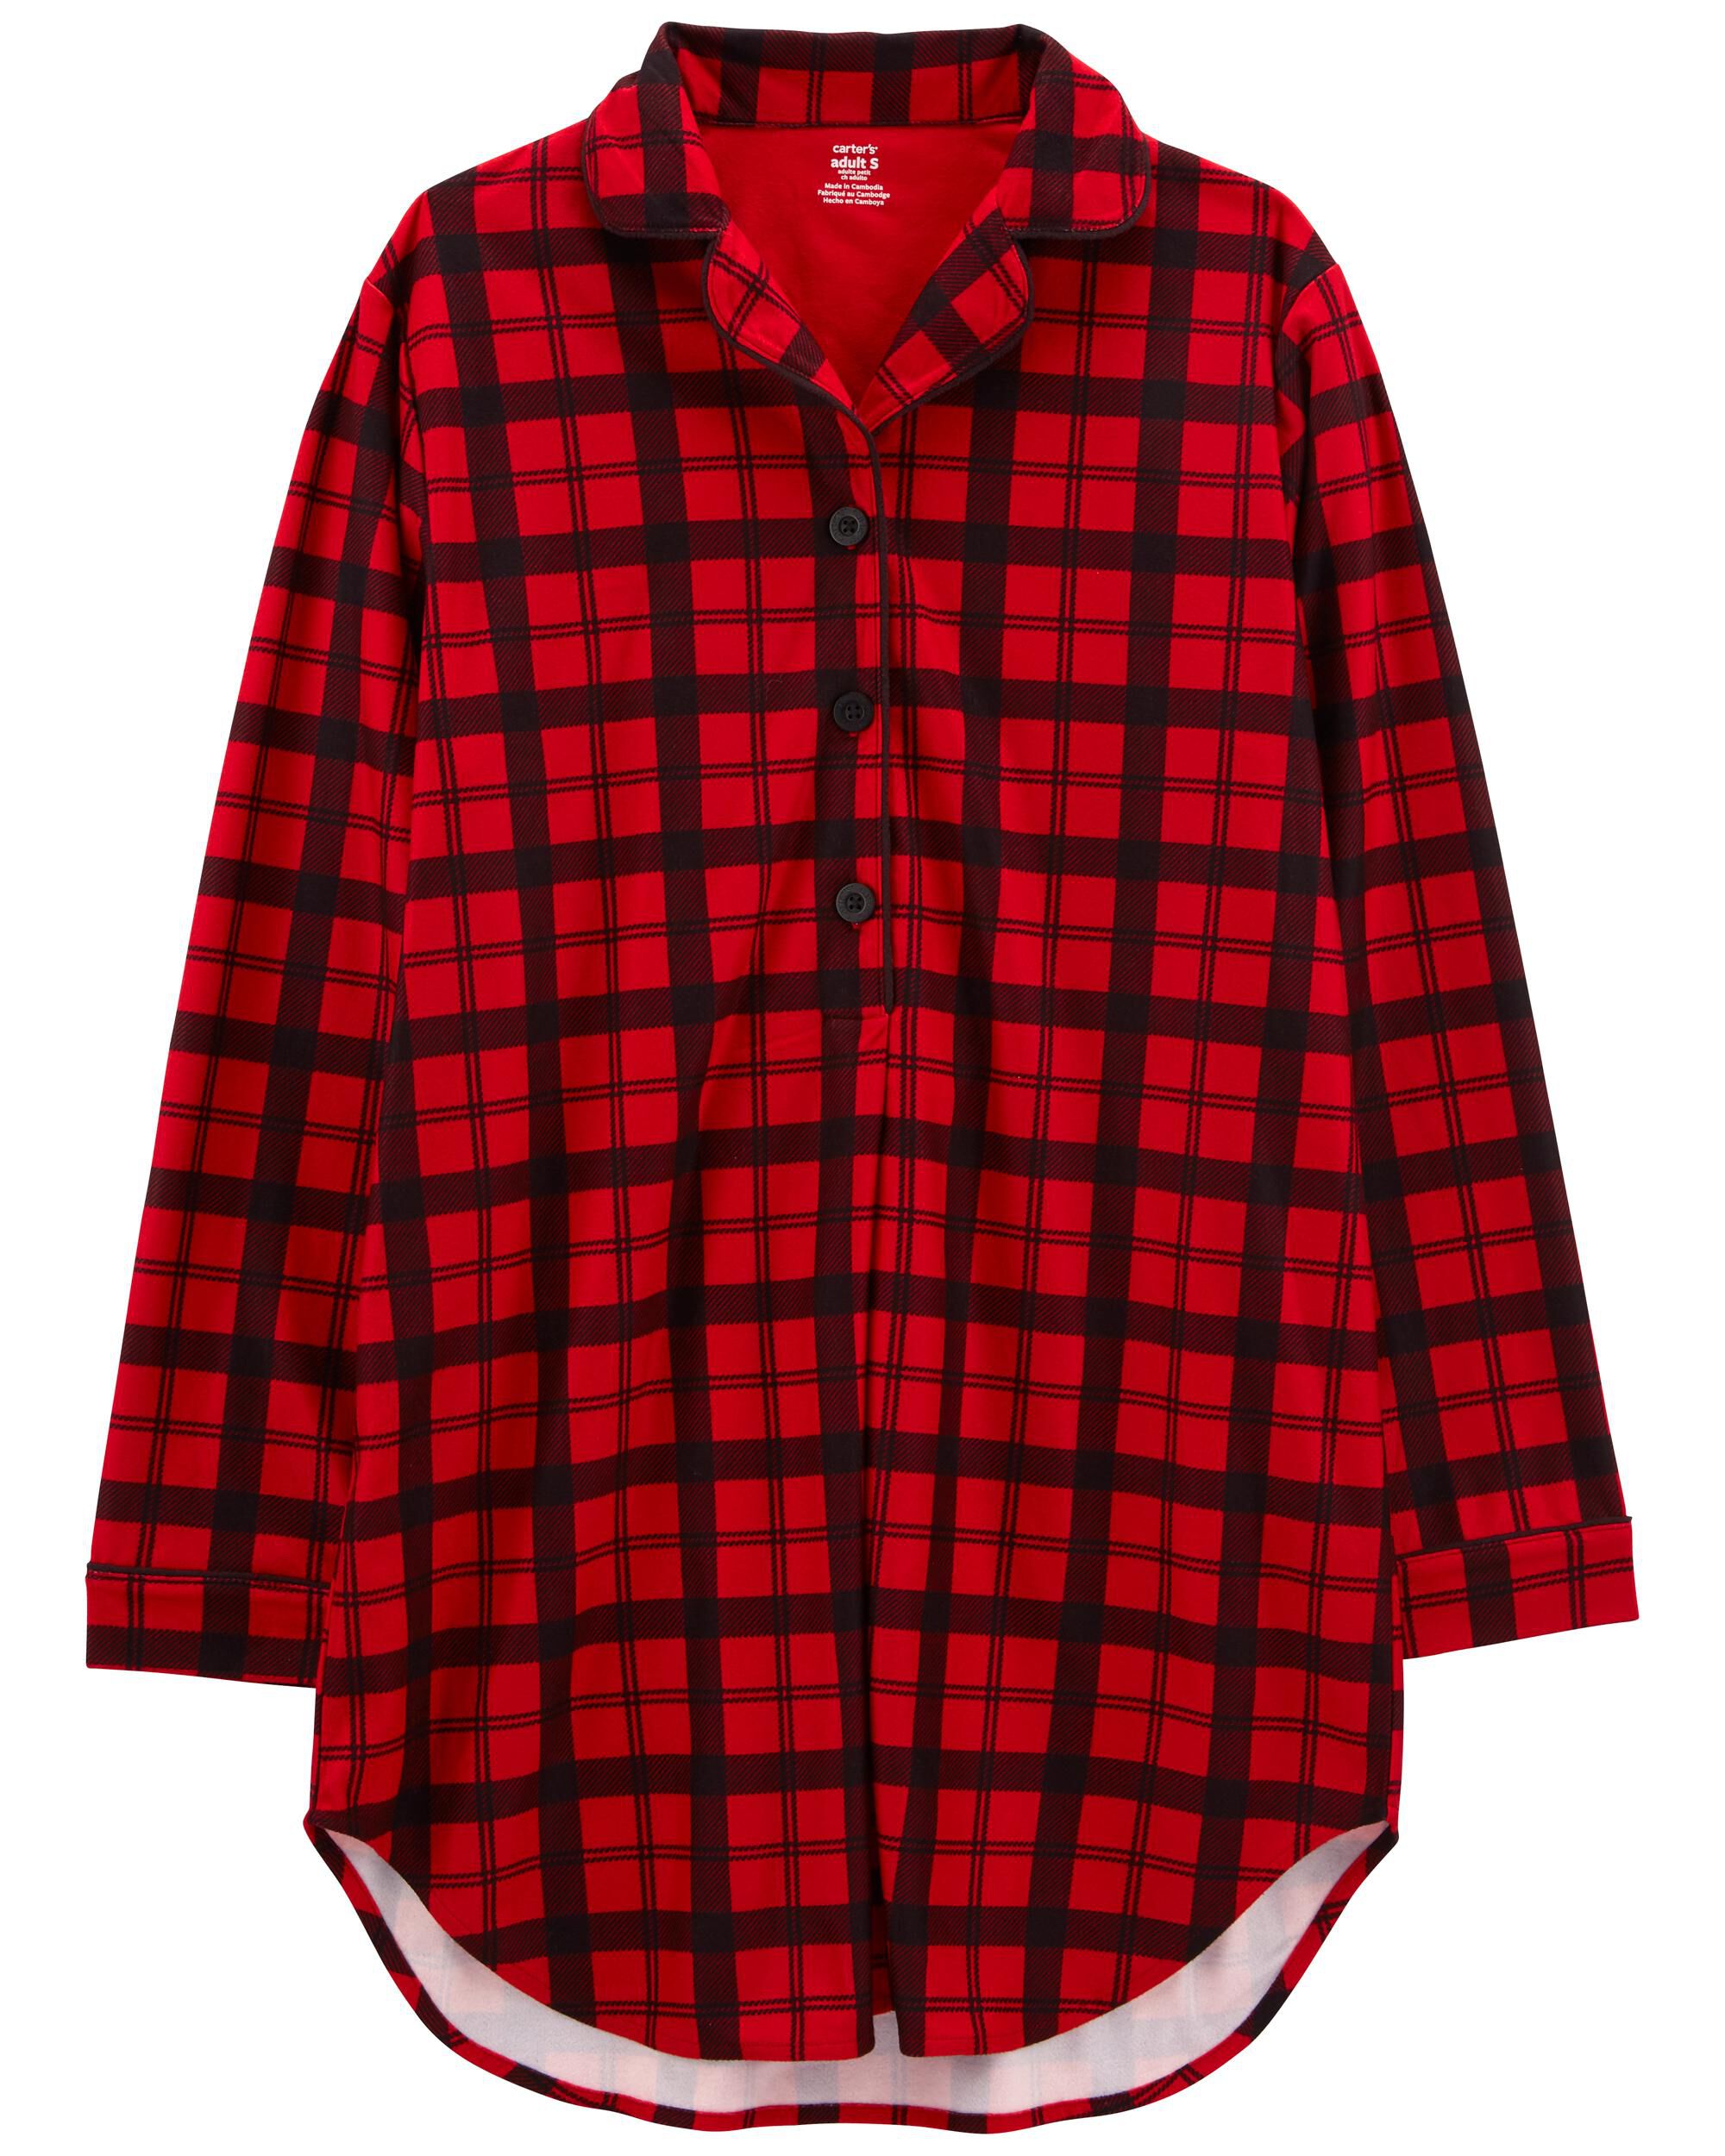 Carters Adult Plaid Fleece Night Gown